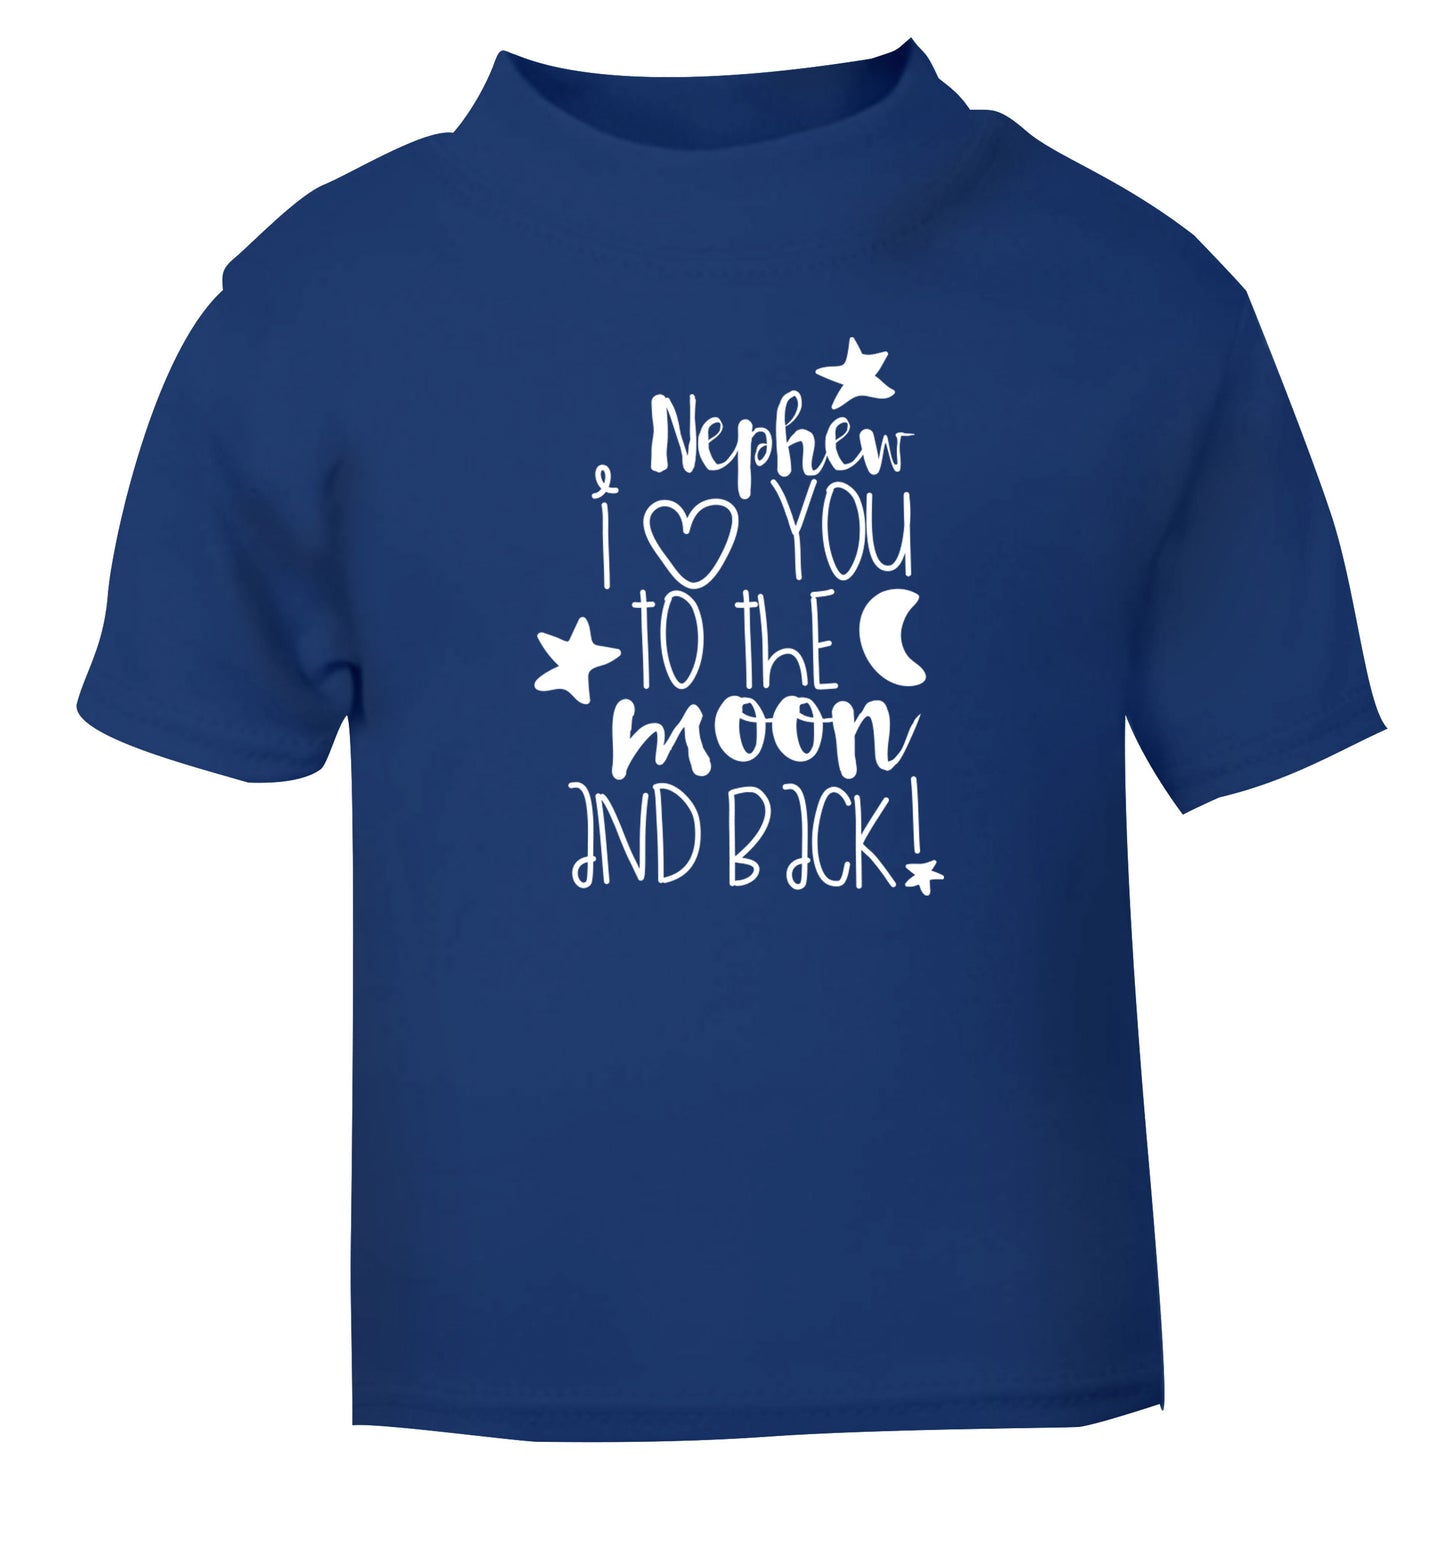 Nephew I love you to the moon and back blue Baby Toddler Tshirt 2 Years